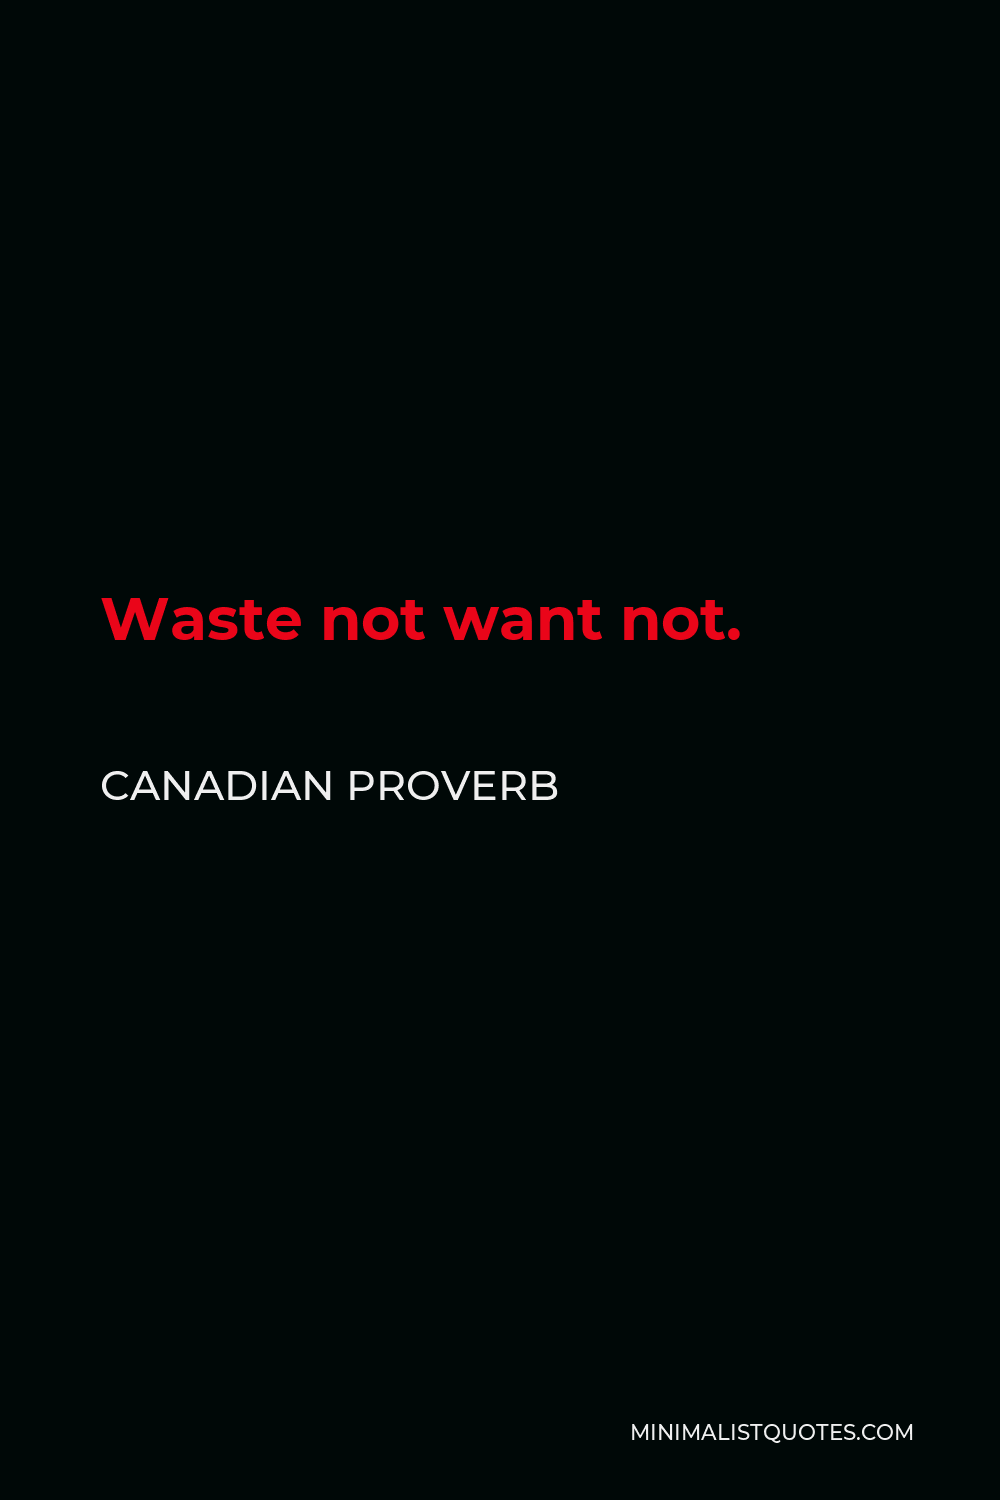 Canadian Proverb Quote - Waste not want not.